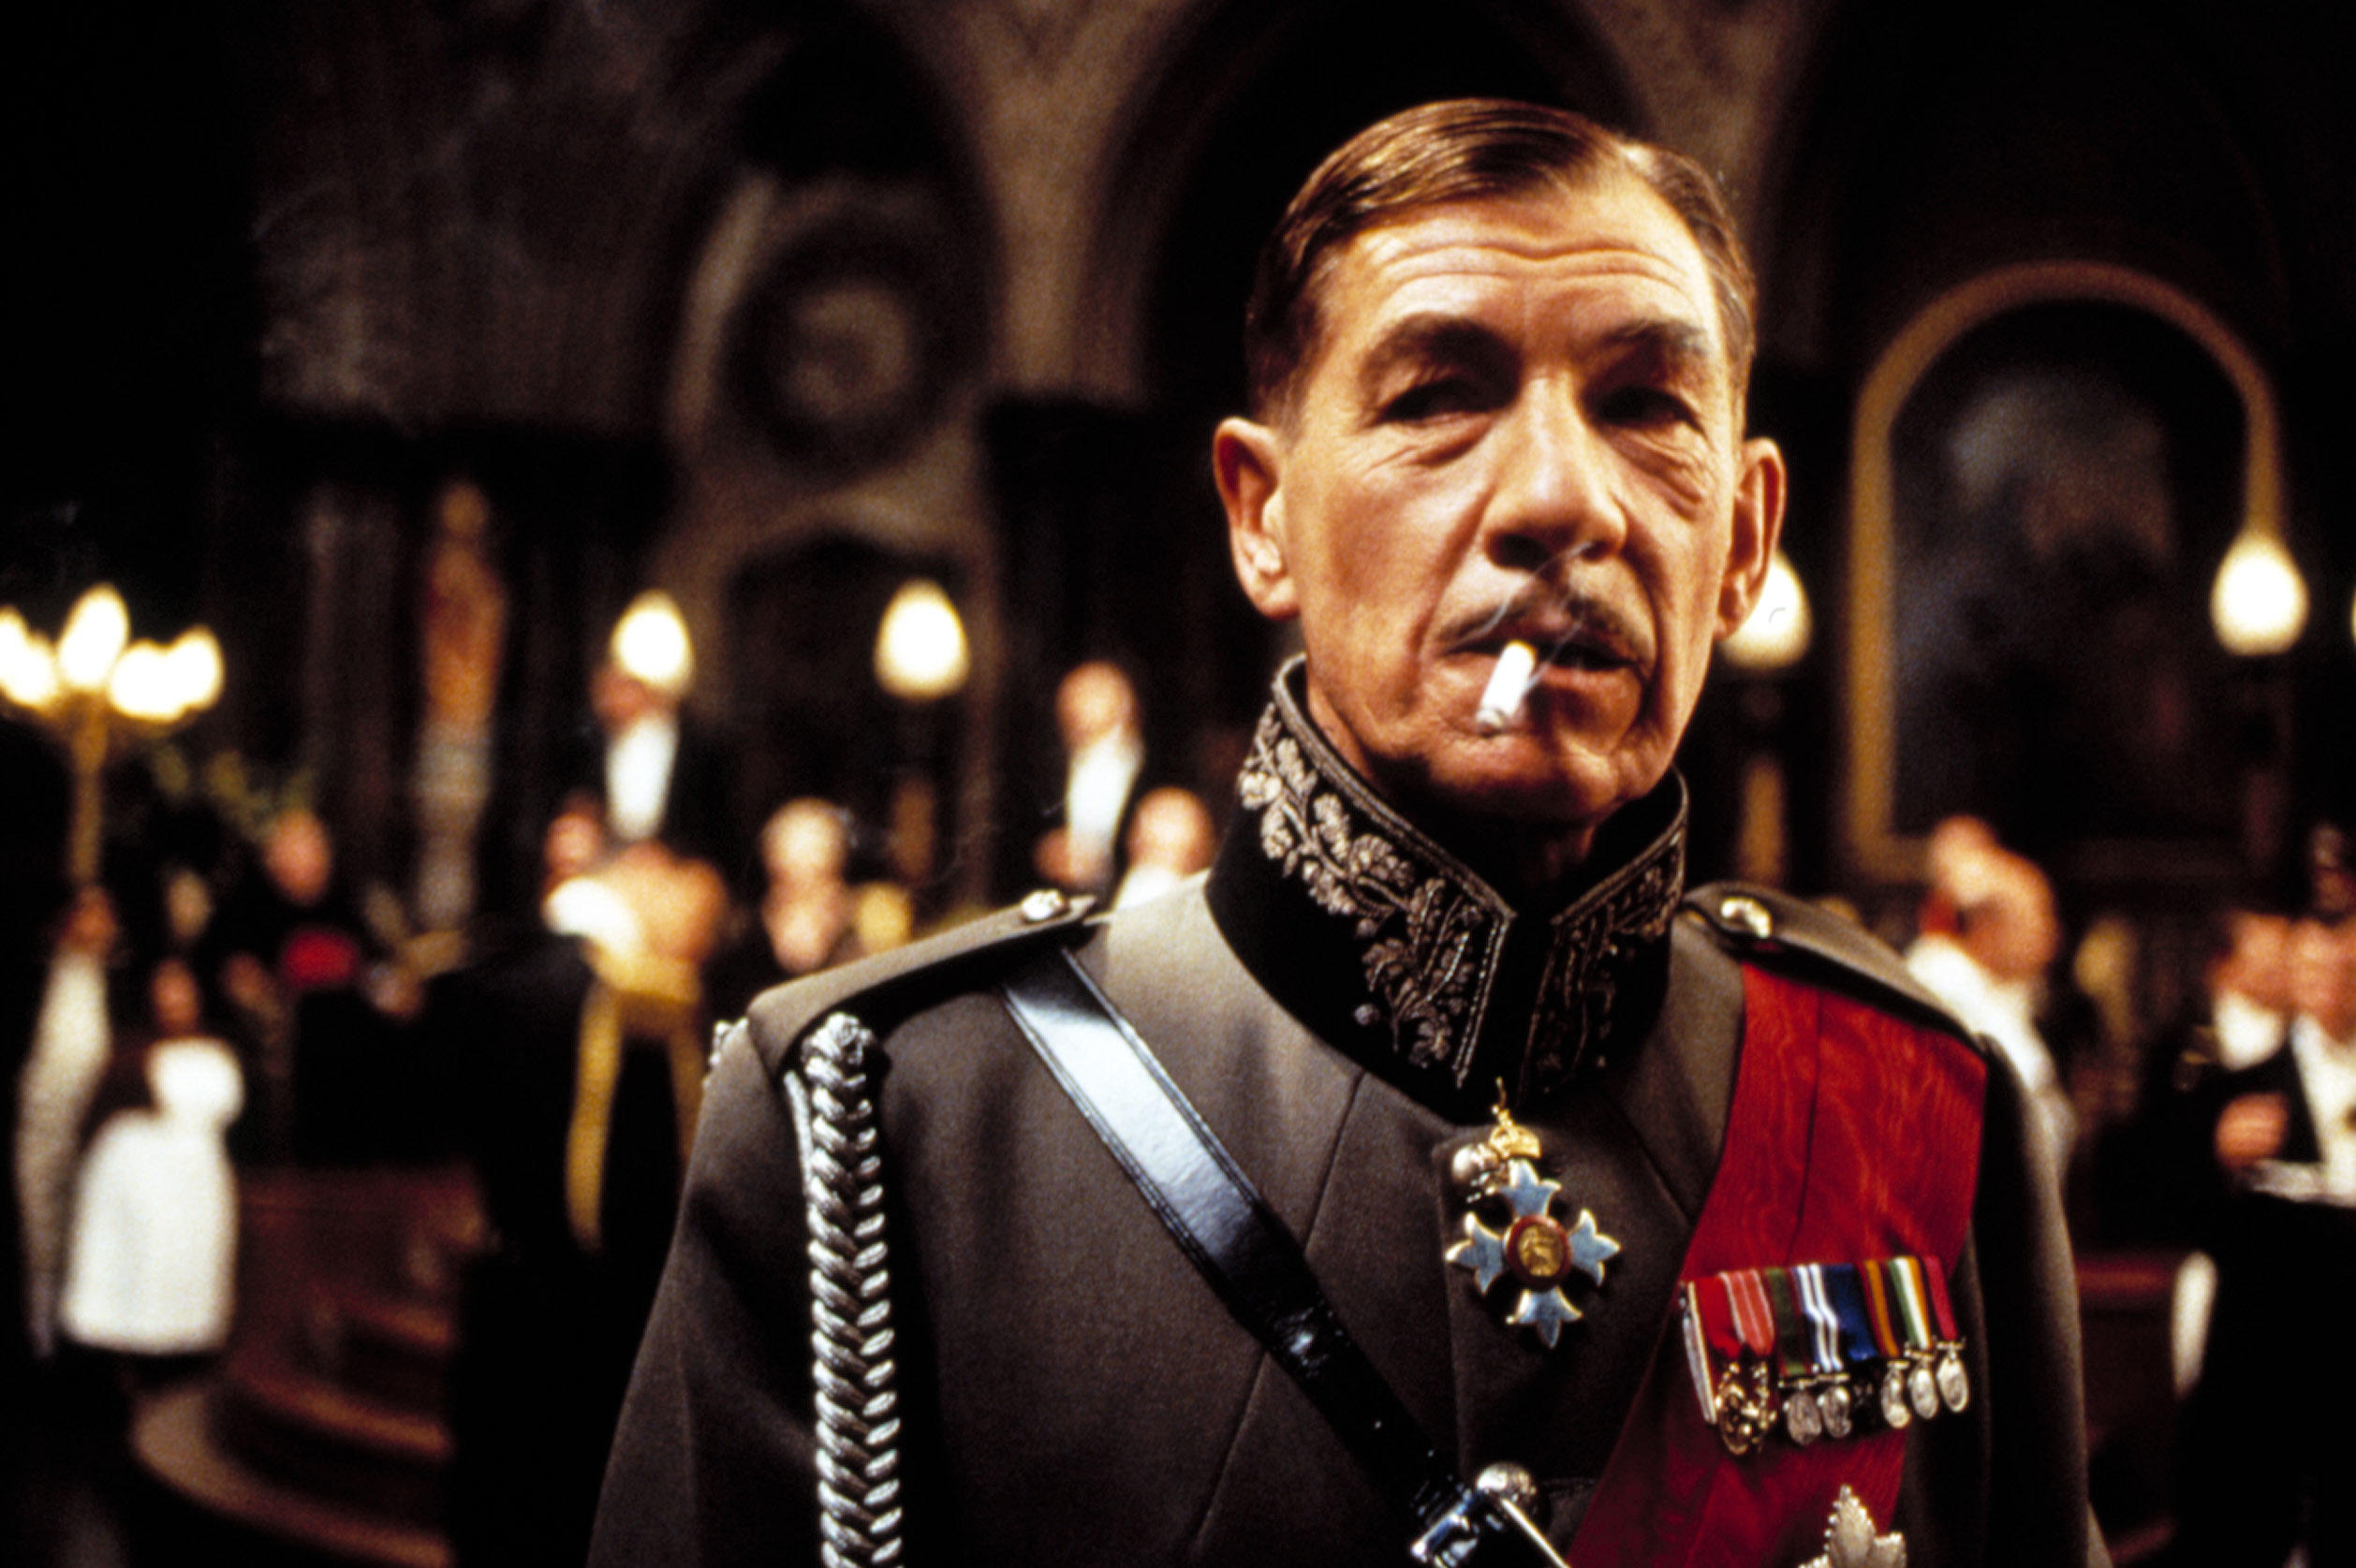 The actor as Richard III in 1995